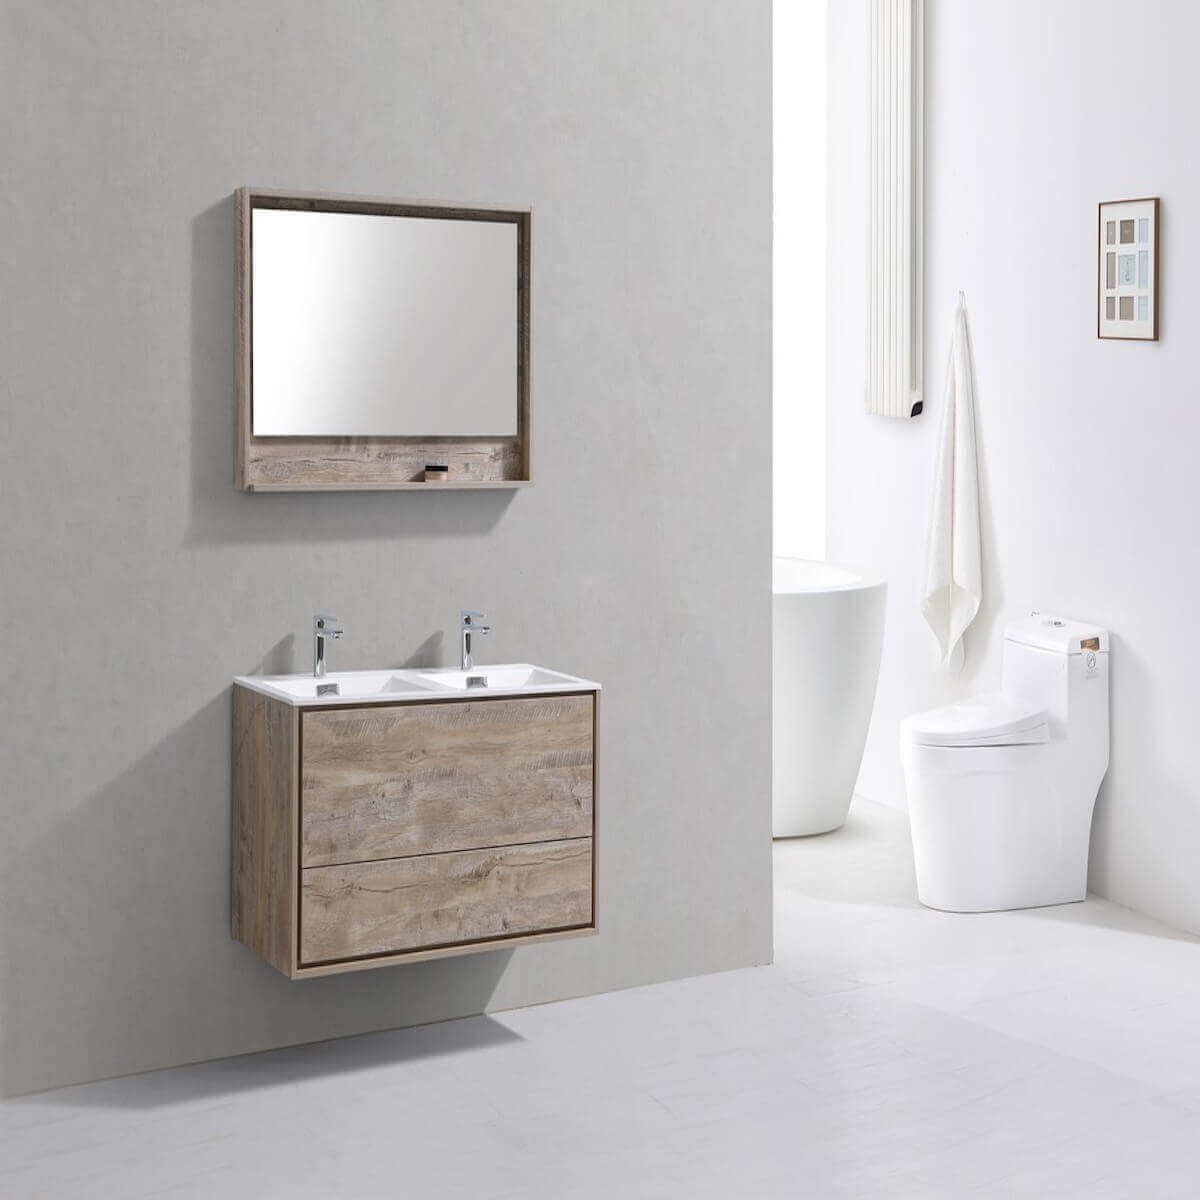 KubeBath DeLusso 48" Nature Wood Wall Mount Double Vanity DL48D-NW in Bathroom #finish_nature wood